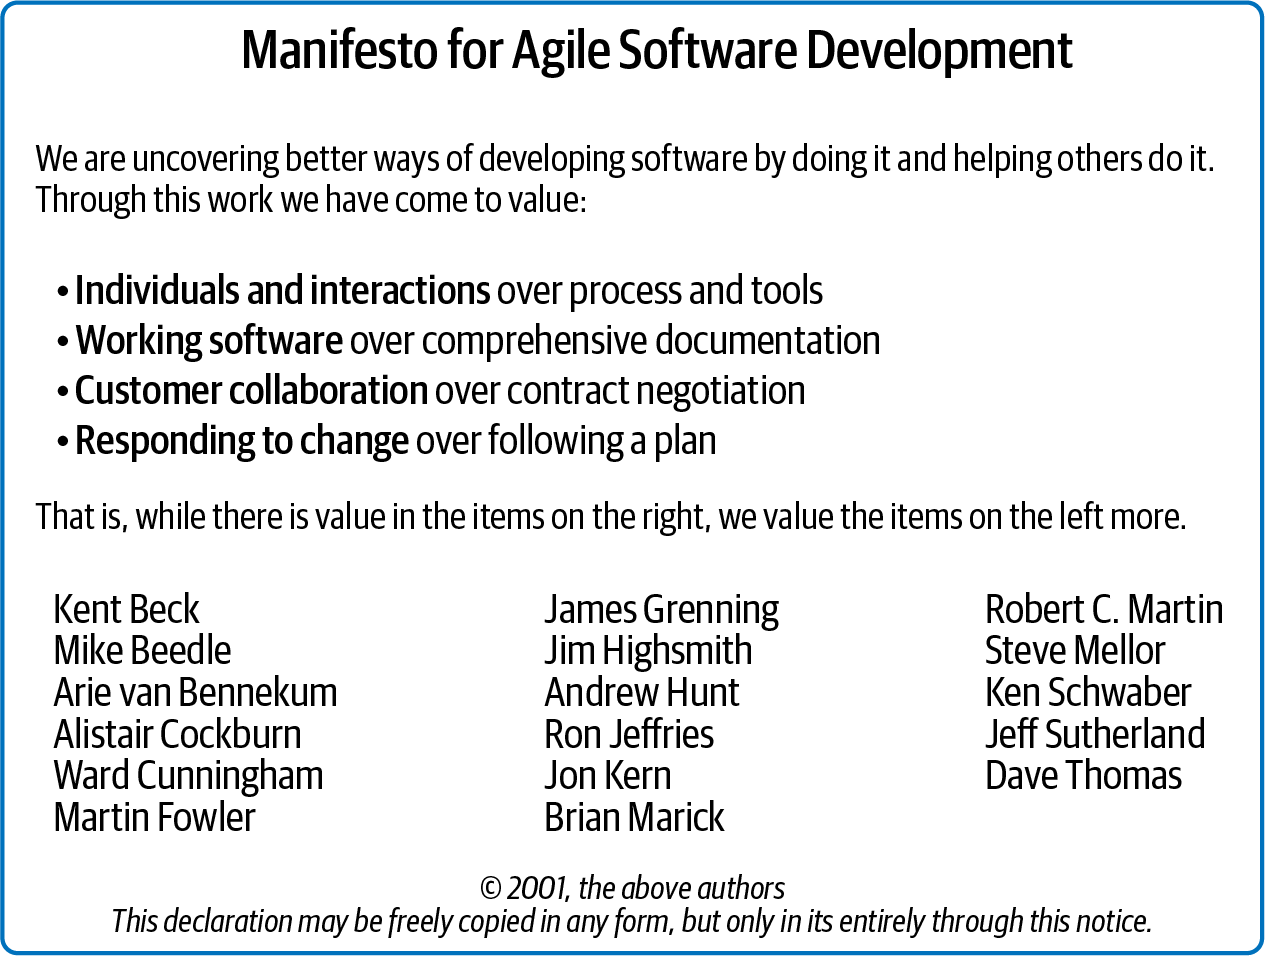 A picture of text with the header “Manifesto for Agile Software Development”. The body of the text reads, “We are uncovering better ways of developing software by doing it and helping others do it. Through this work we have come to value: Individuals and interactions over processes and tools; Working software over comprehensive documentation; Customer collaboration over contract negotiation; Responding to change over following a plan. That is, while there is value in the items on the right, we value the items on the left more.” It’s followed by the names of 17 people and a copyright notice.